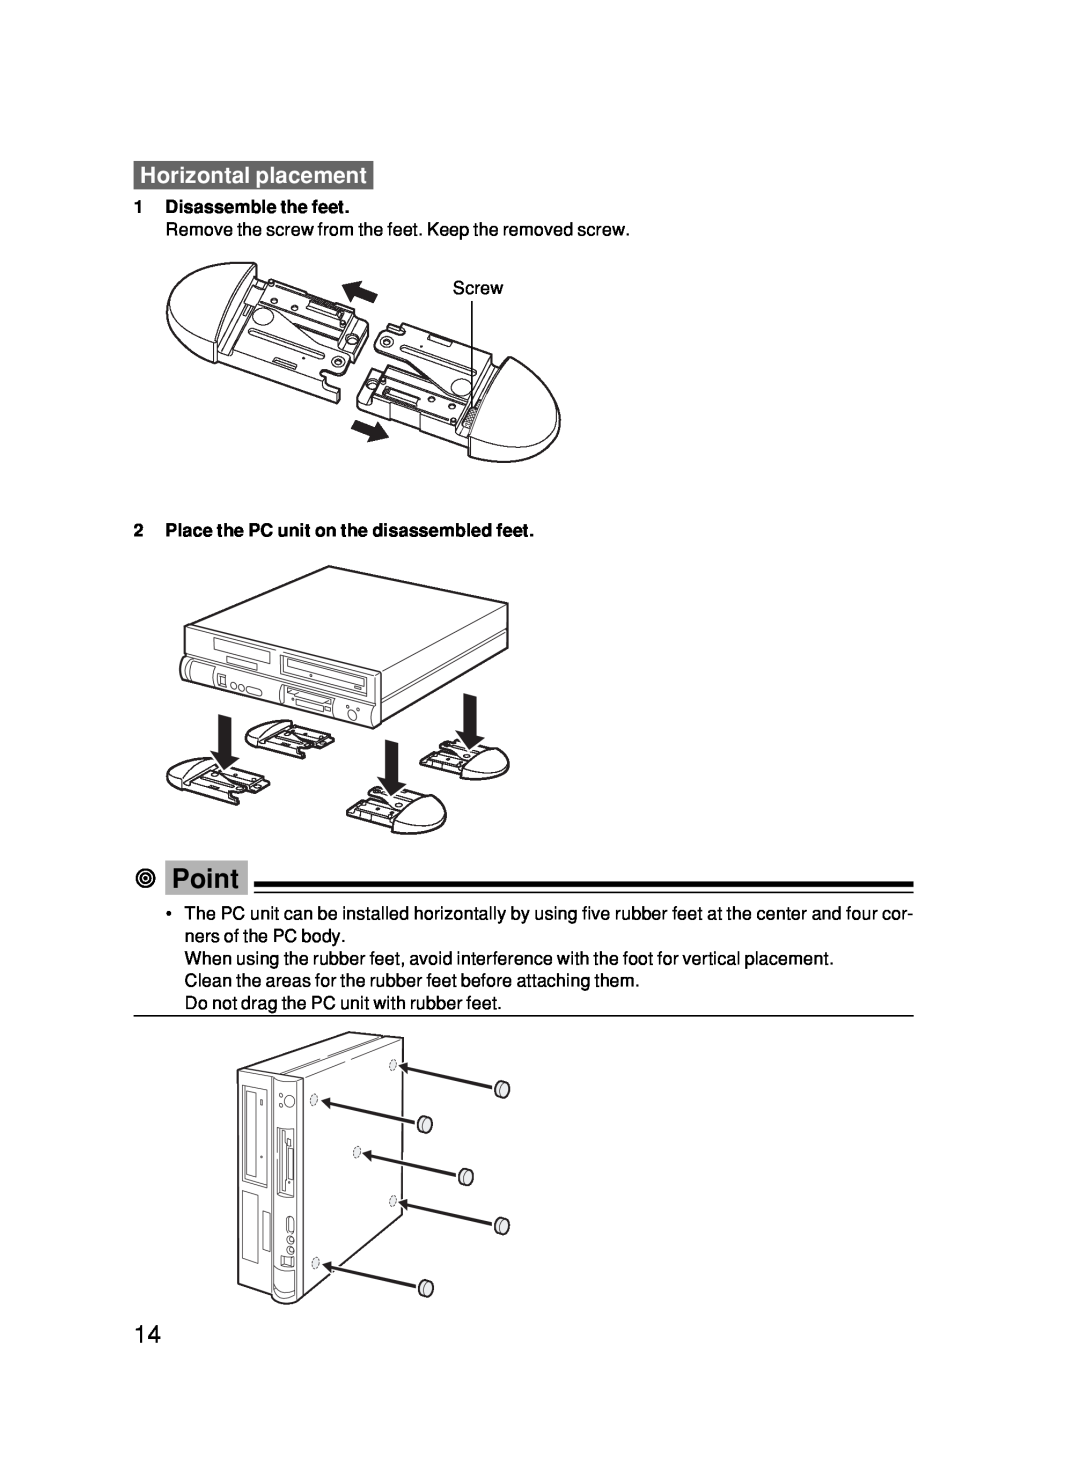 Fujitsu 500 user manual Horizontal placement, Disassemble the feet, Place the PC unit on the disassembled feet, Point 